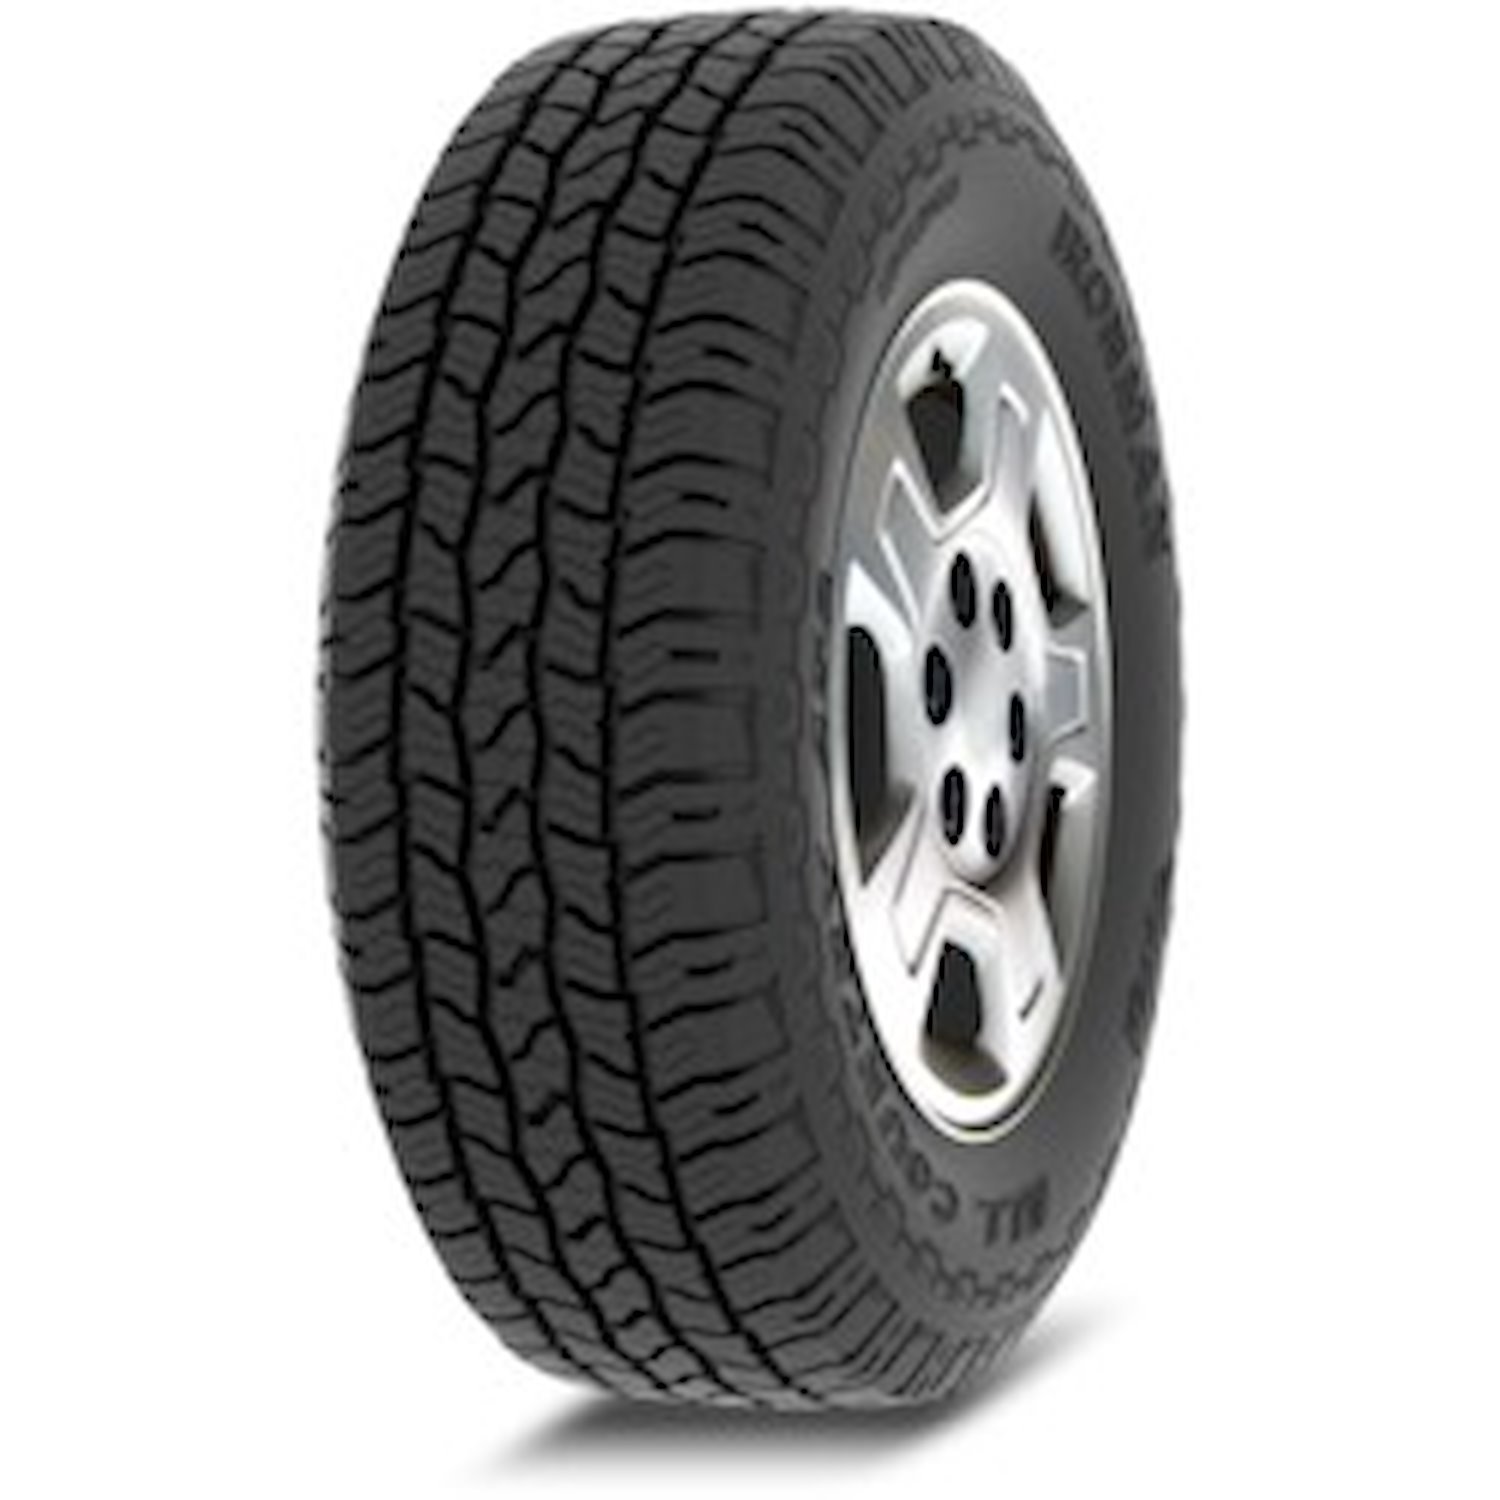 07616 All Country AT2 Tire, 265/70R17, 115T